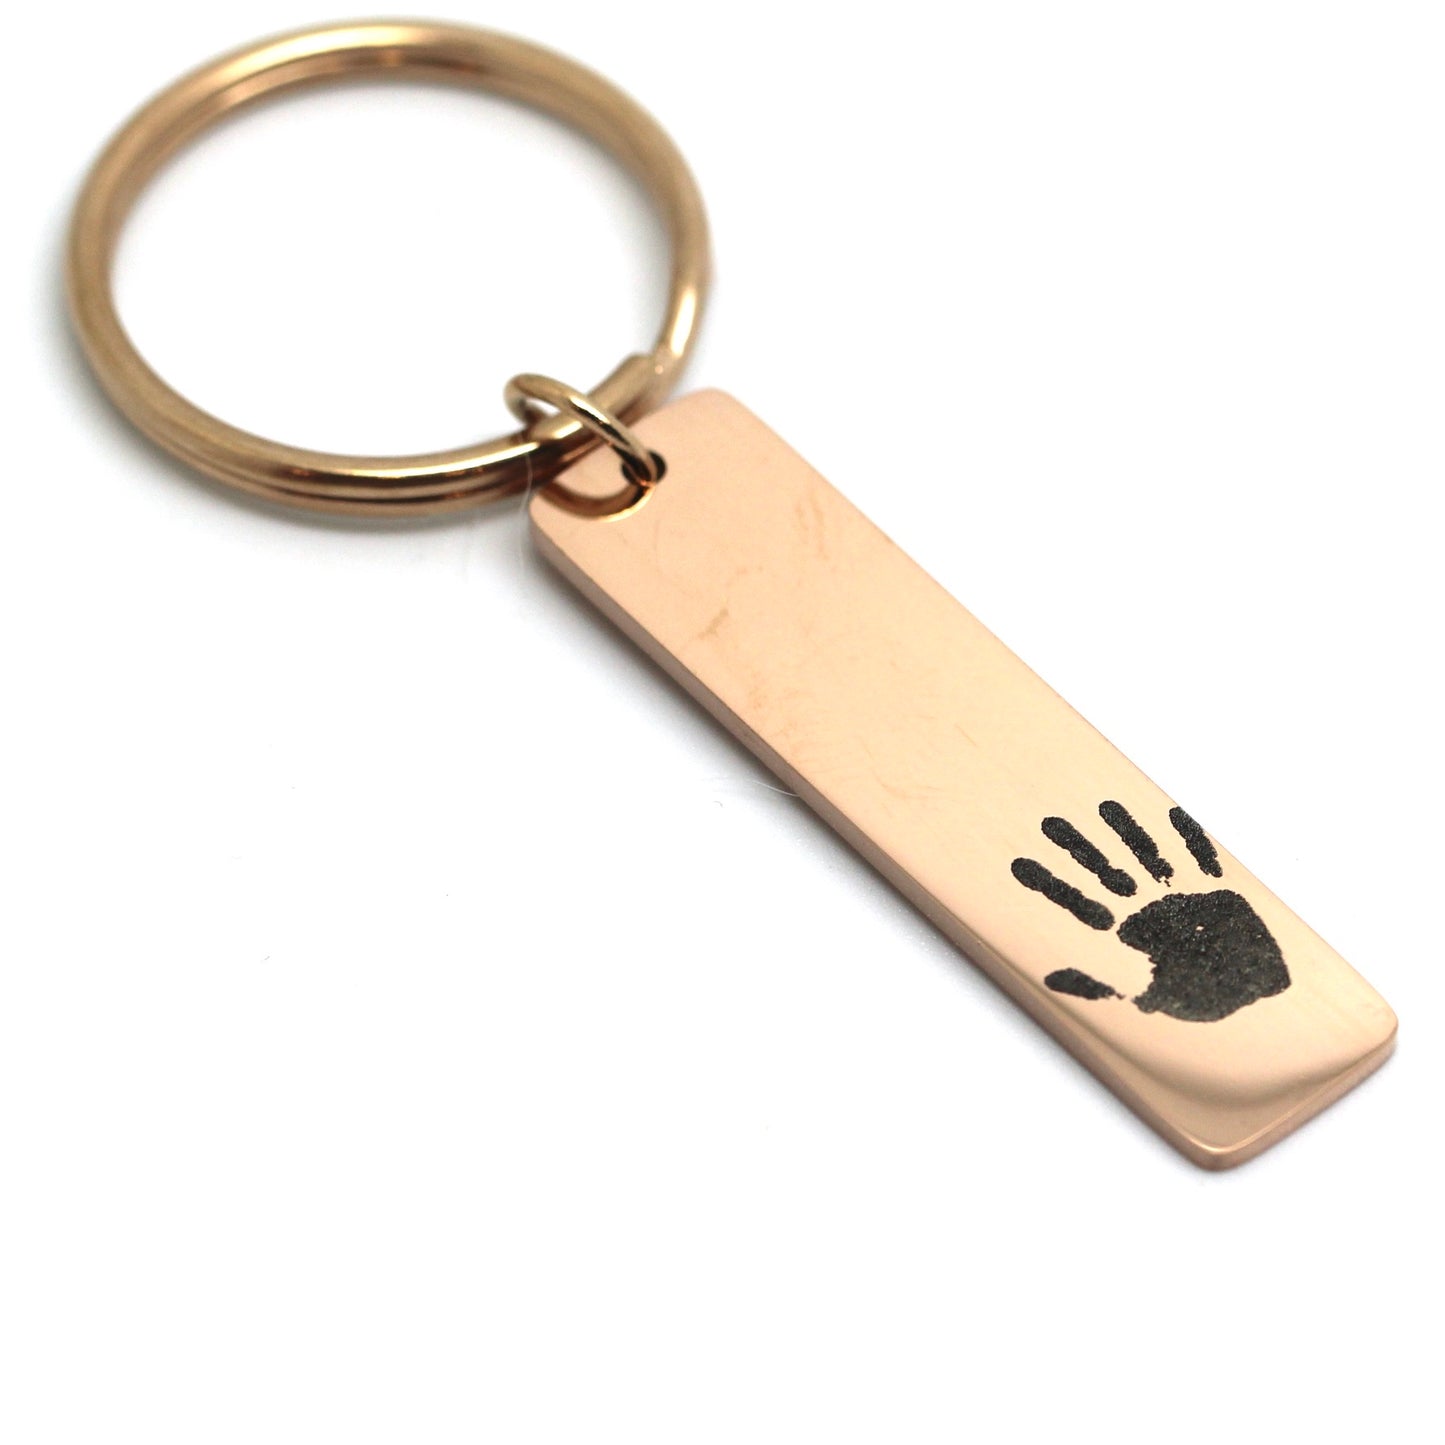 Custom Engraved Keychain - Engraved with actual Paw, Nose, Handwriting, Handprint or Fingerprint